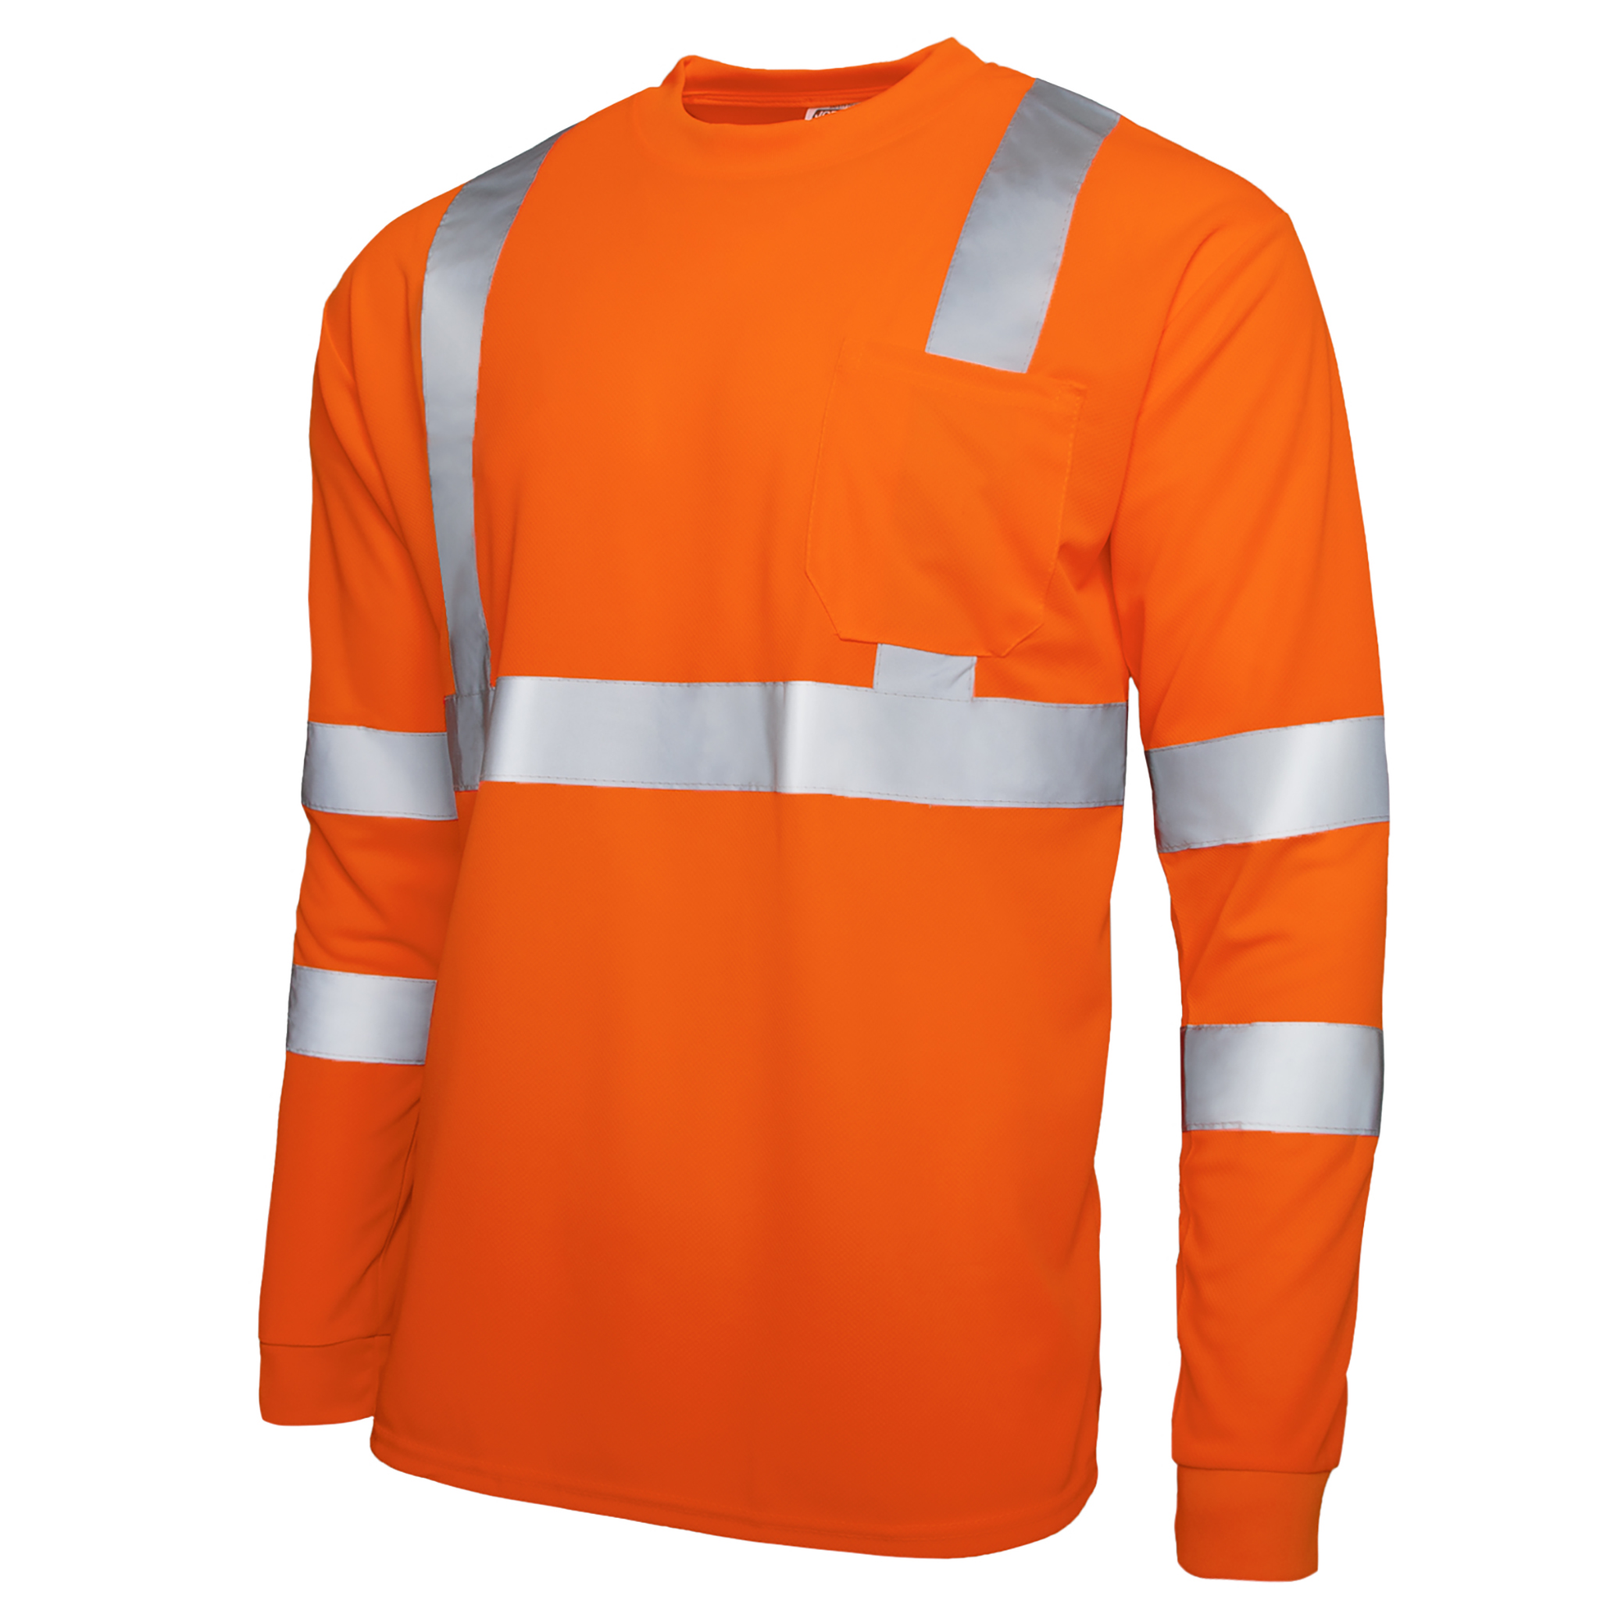 Diagonal view of the orange hi-vis reflective safety long sleeve shirt ANSI compliant class 3 type R